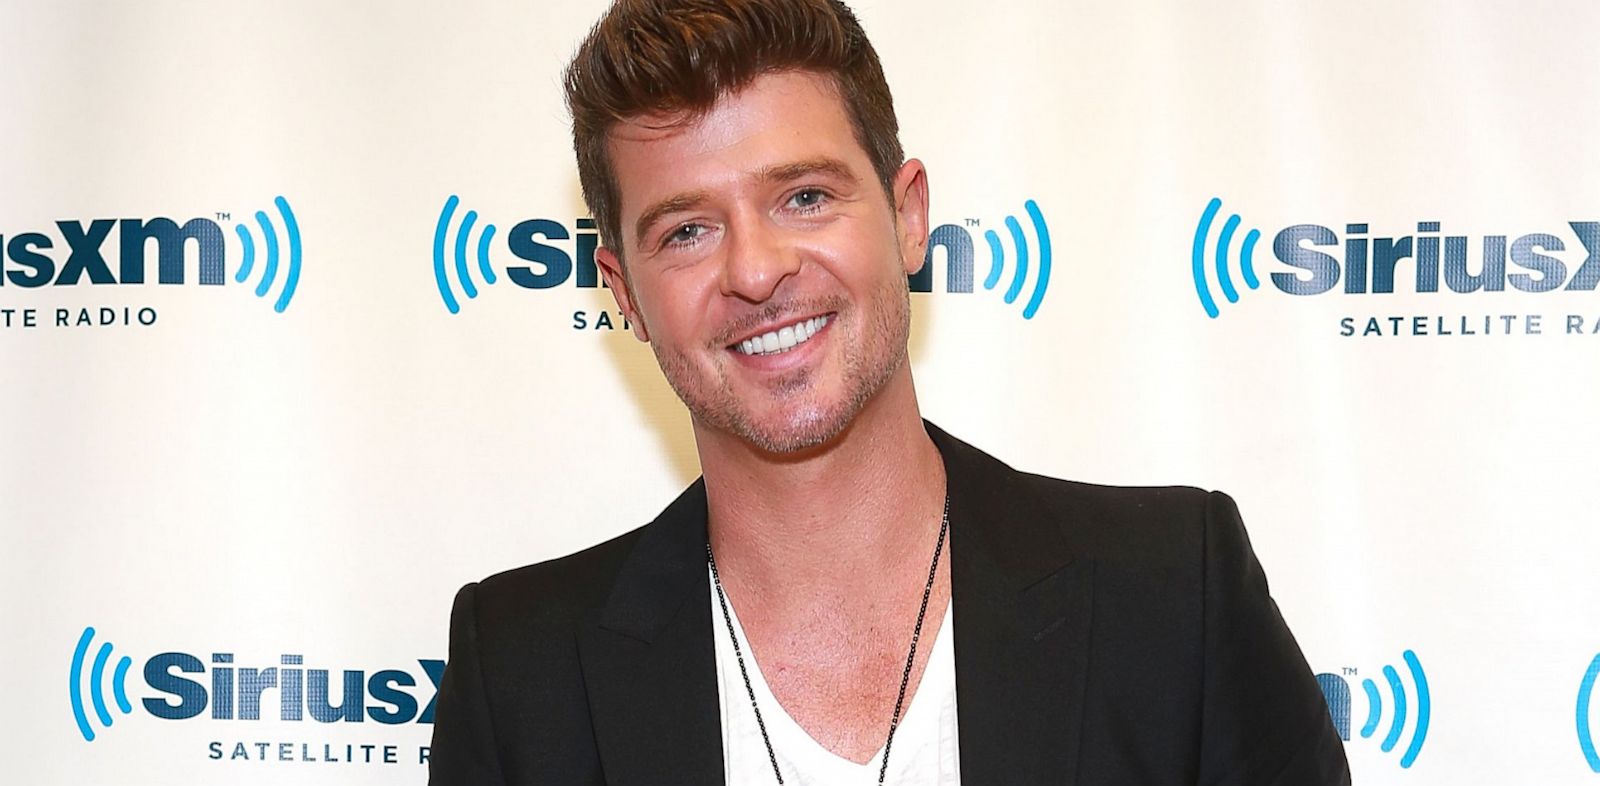 Robin Thicke Backgrounds, Compatible - PC, Mobile, Gadgets| 1600x786 px